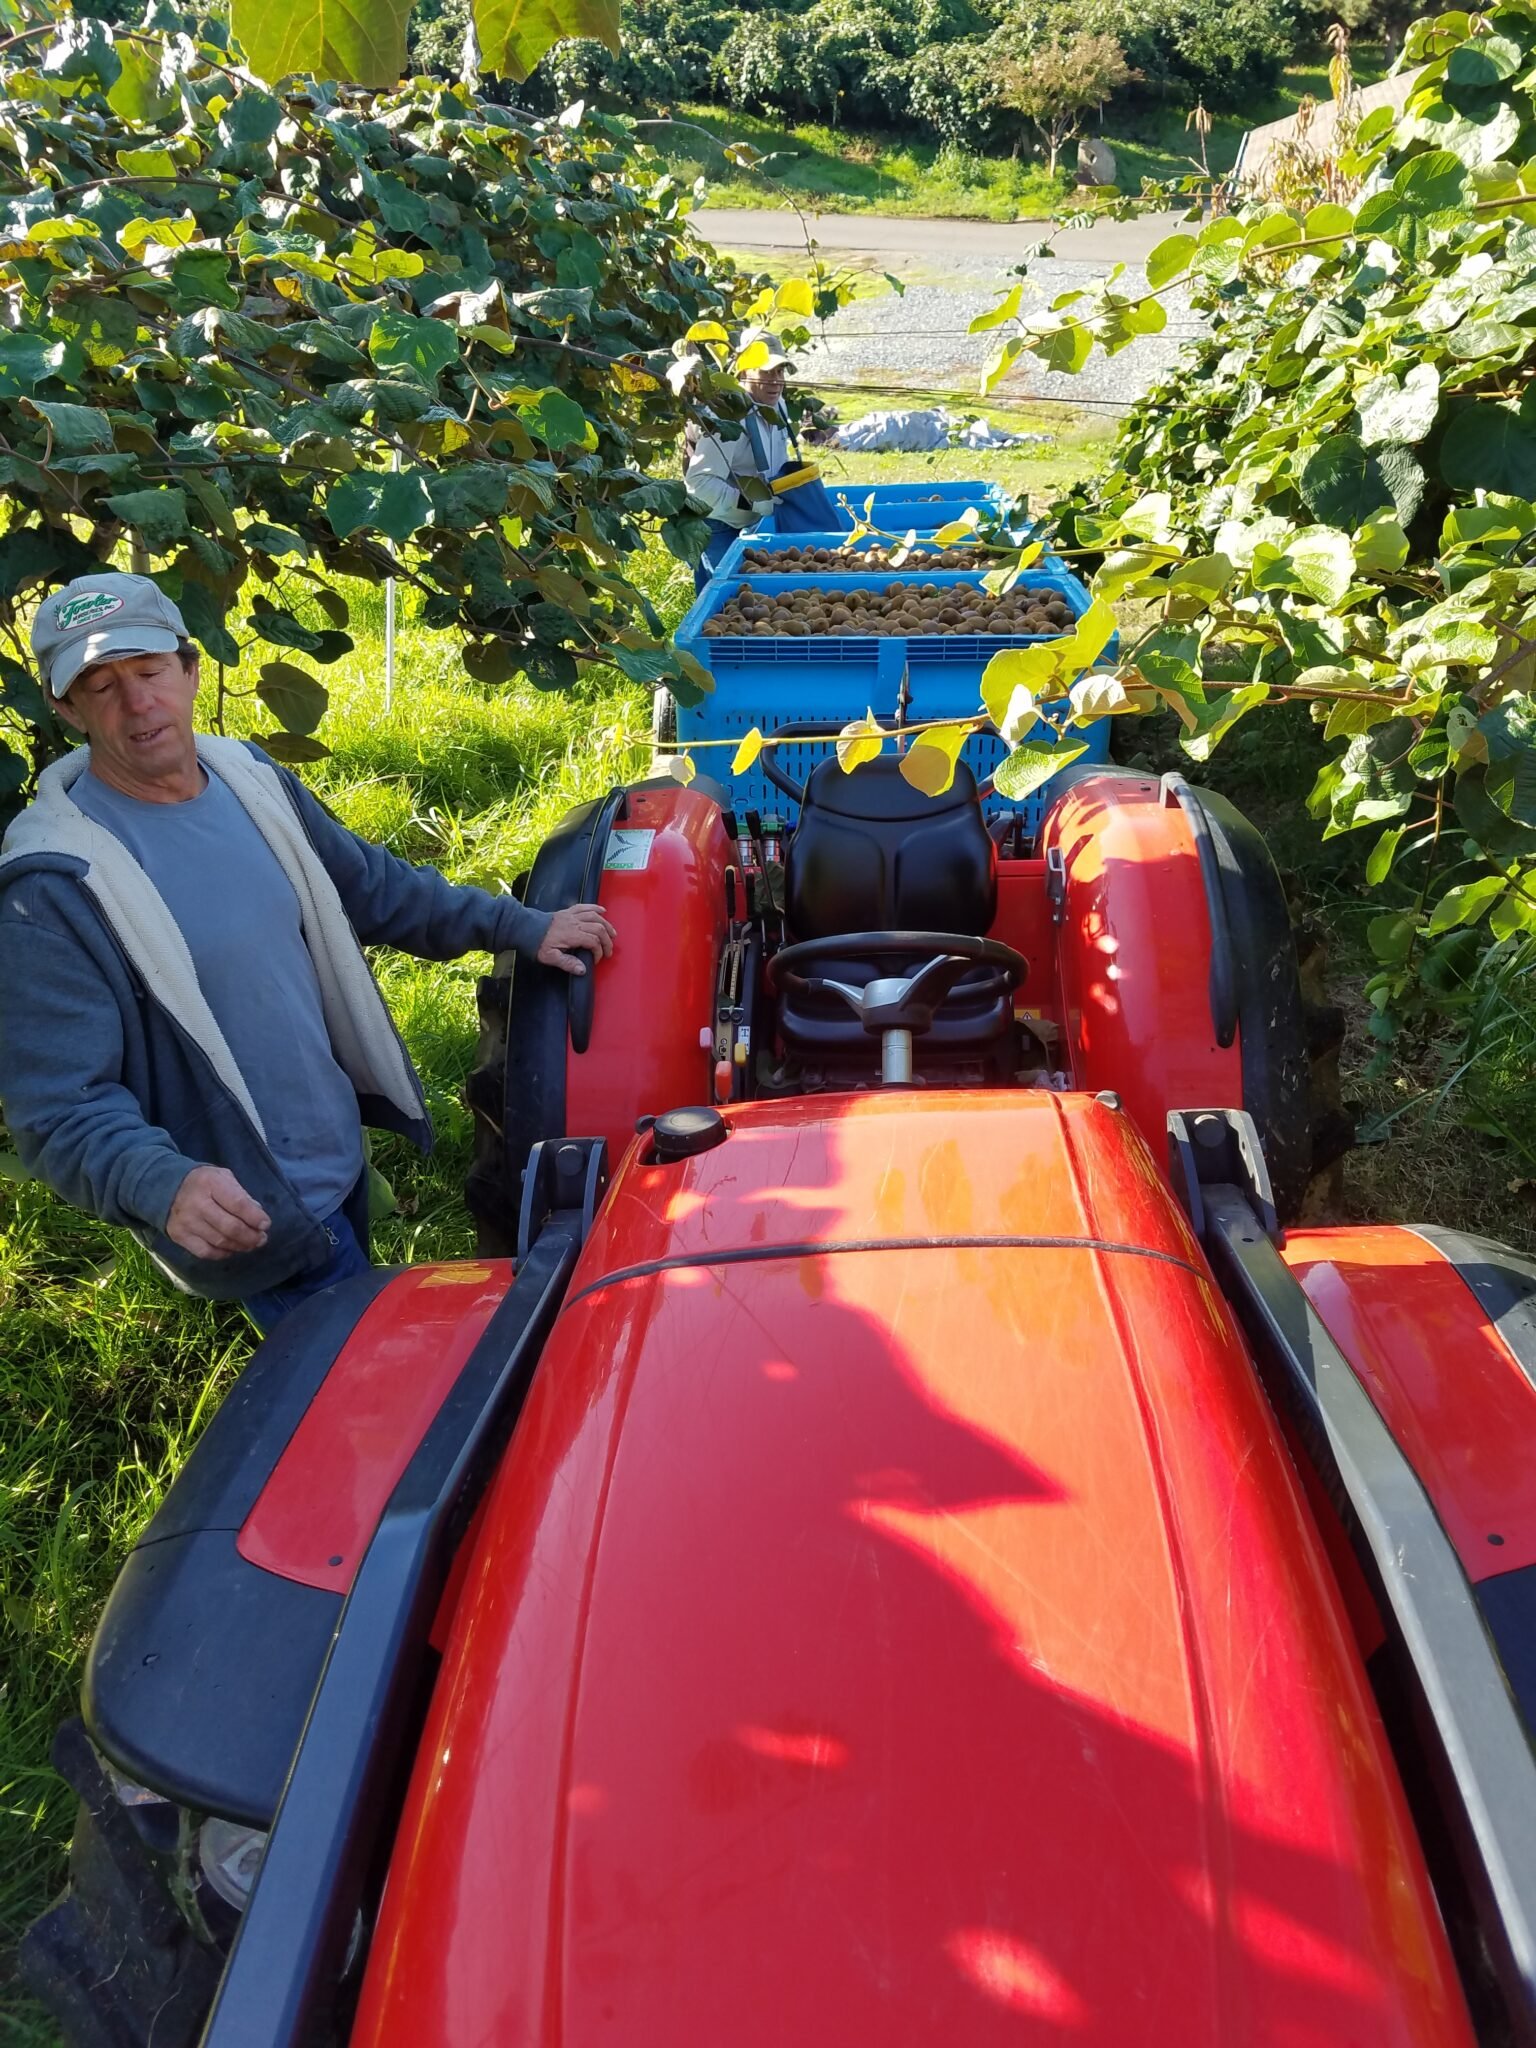 Jim-Brenner-during-harvest-getting-ready-to-move-the-bins-loaded-with-1000-lbs-each-of-organic-kiwi-to-the-next-section-of-vineyard-to-be-picked-1536x2048.jpg